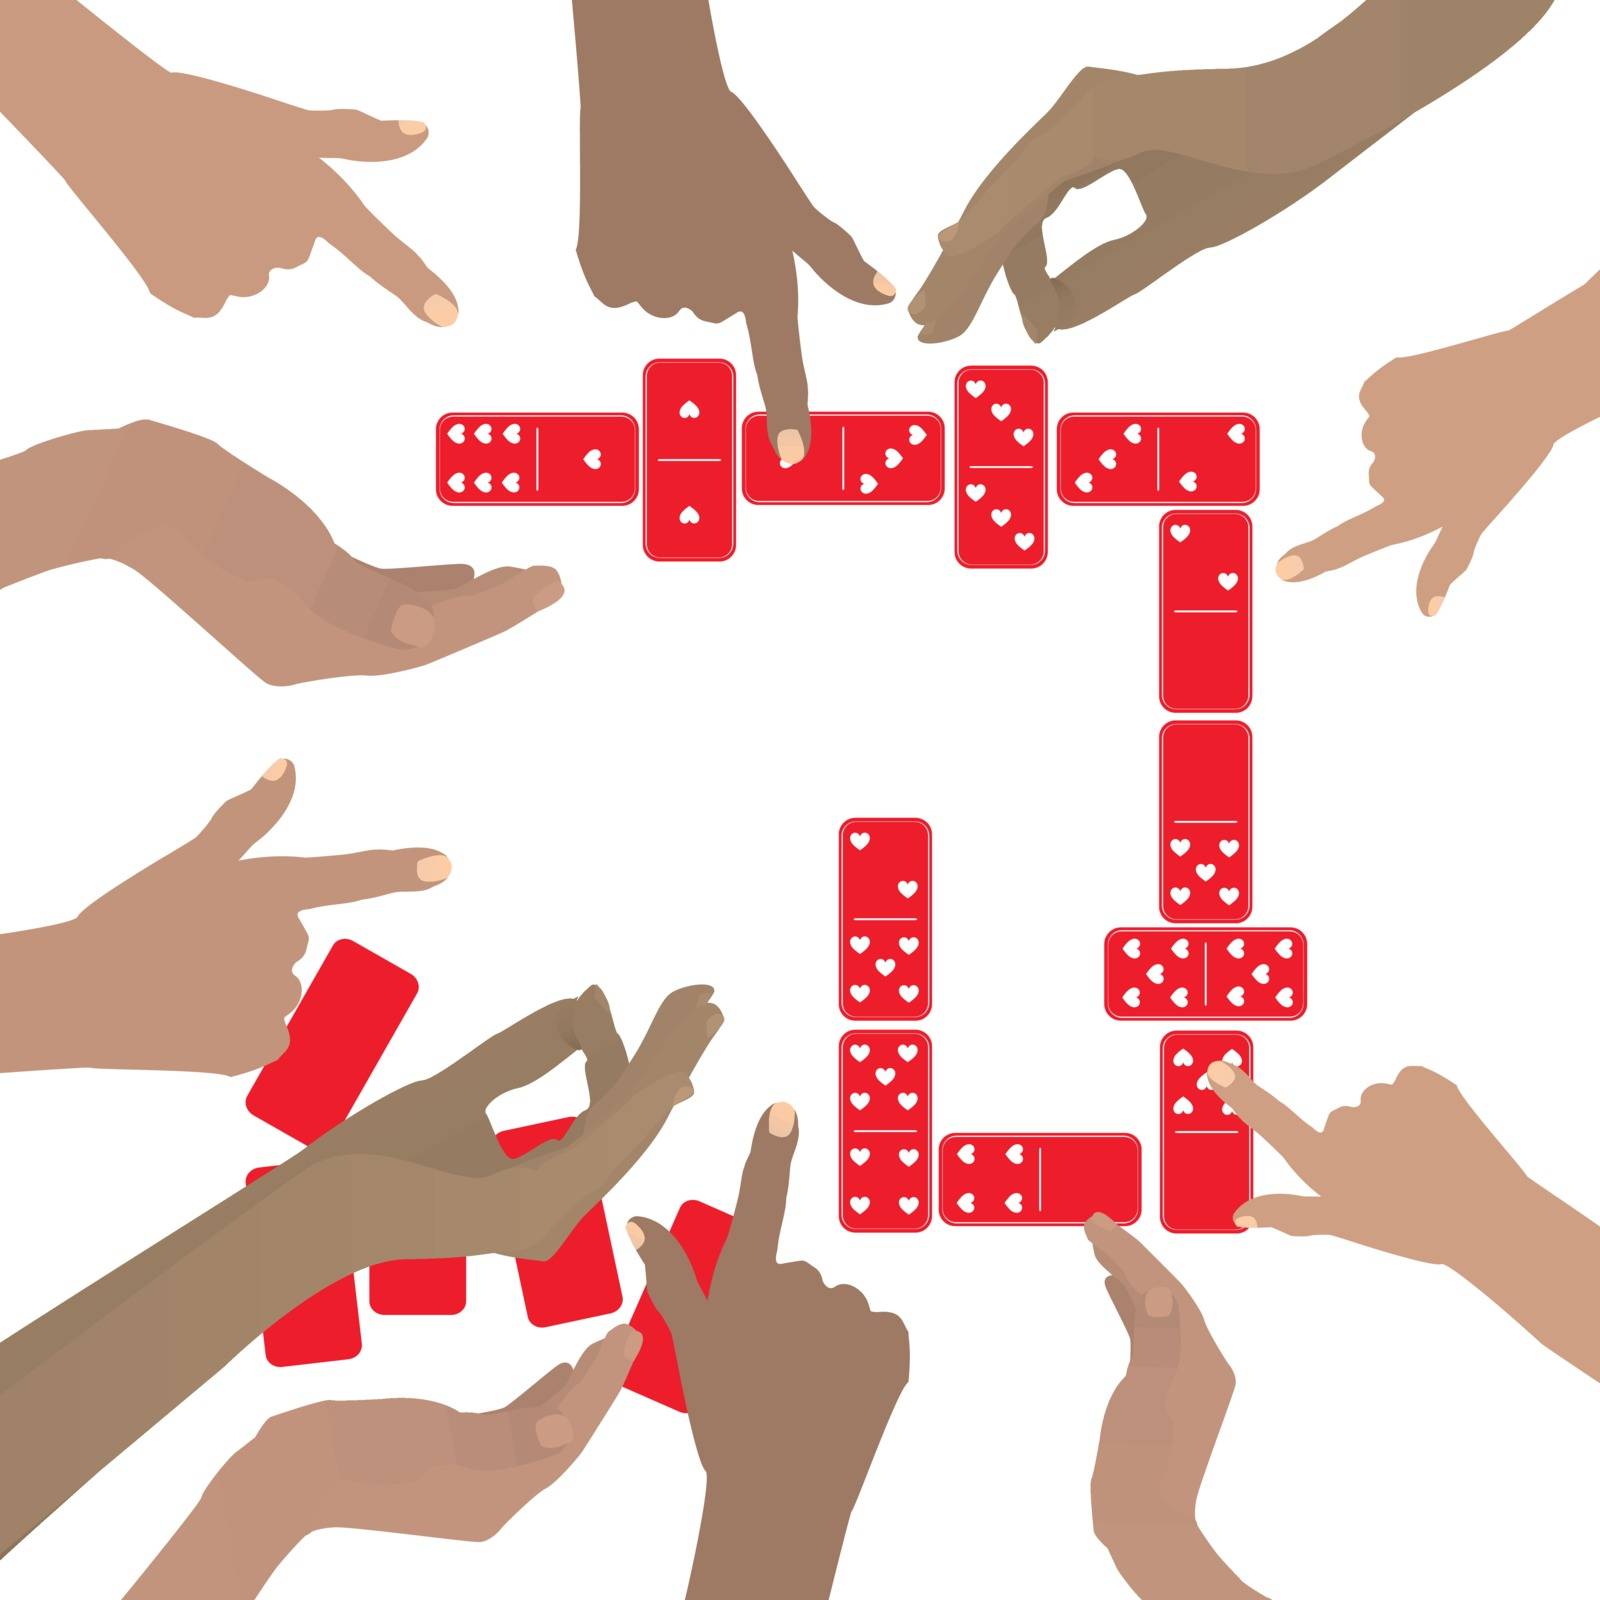 Hands playing dominoes red. On a white background. Illustration for your design.